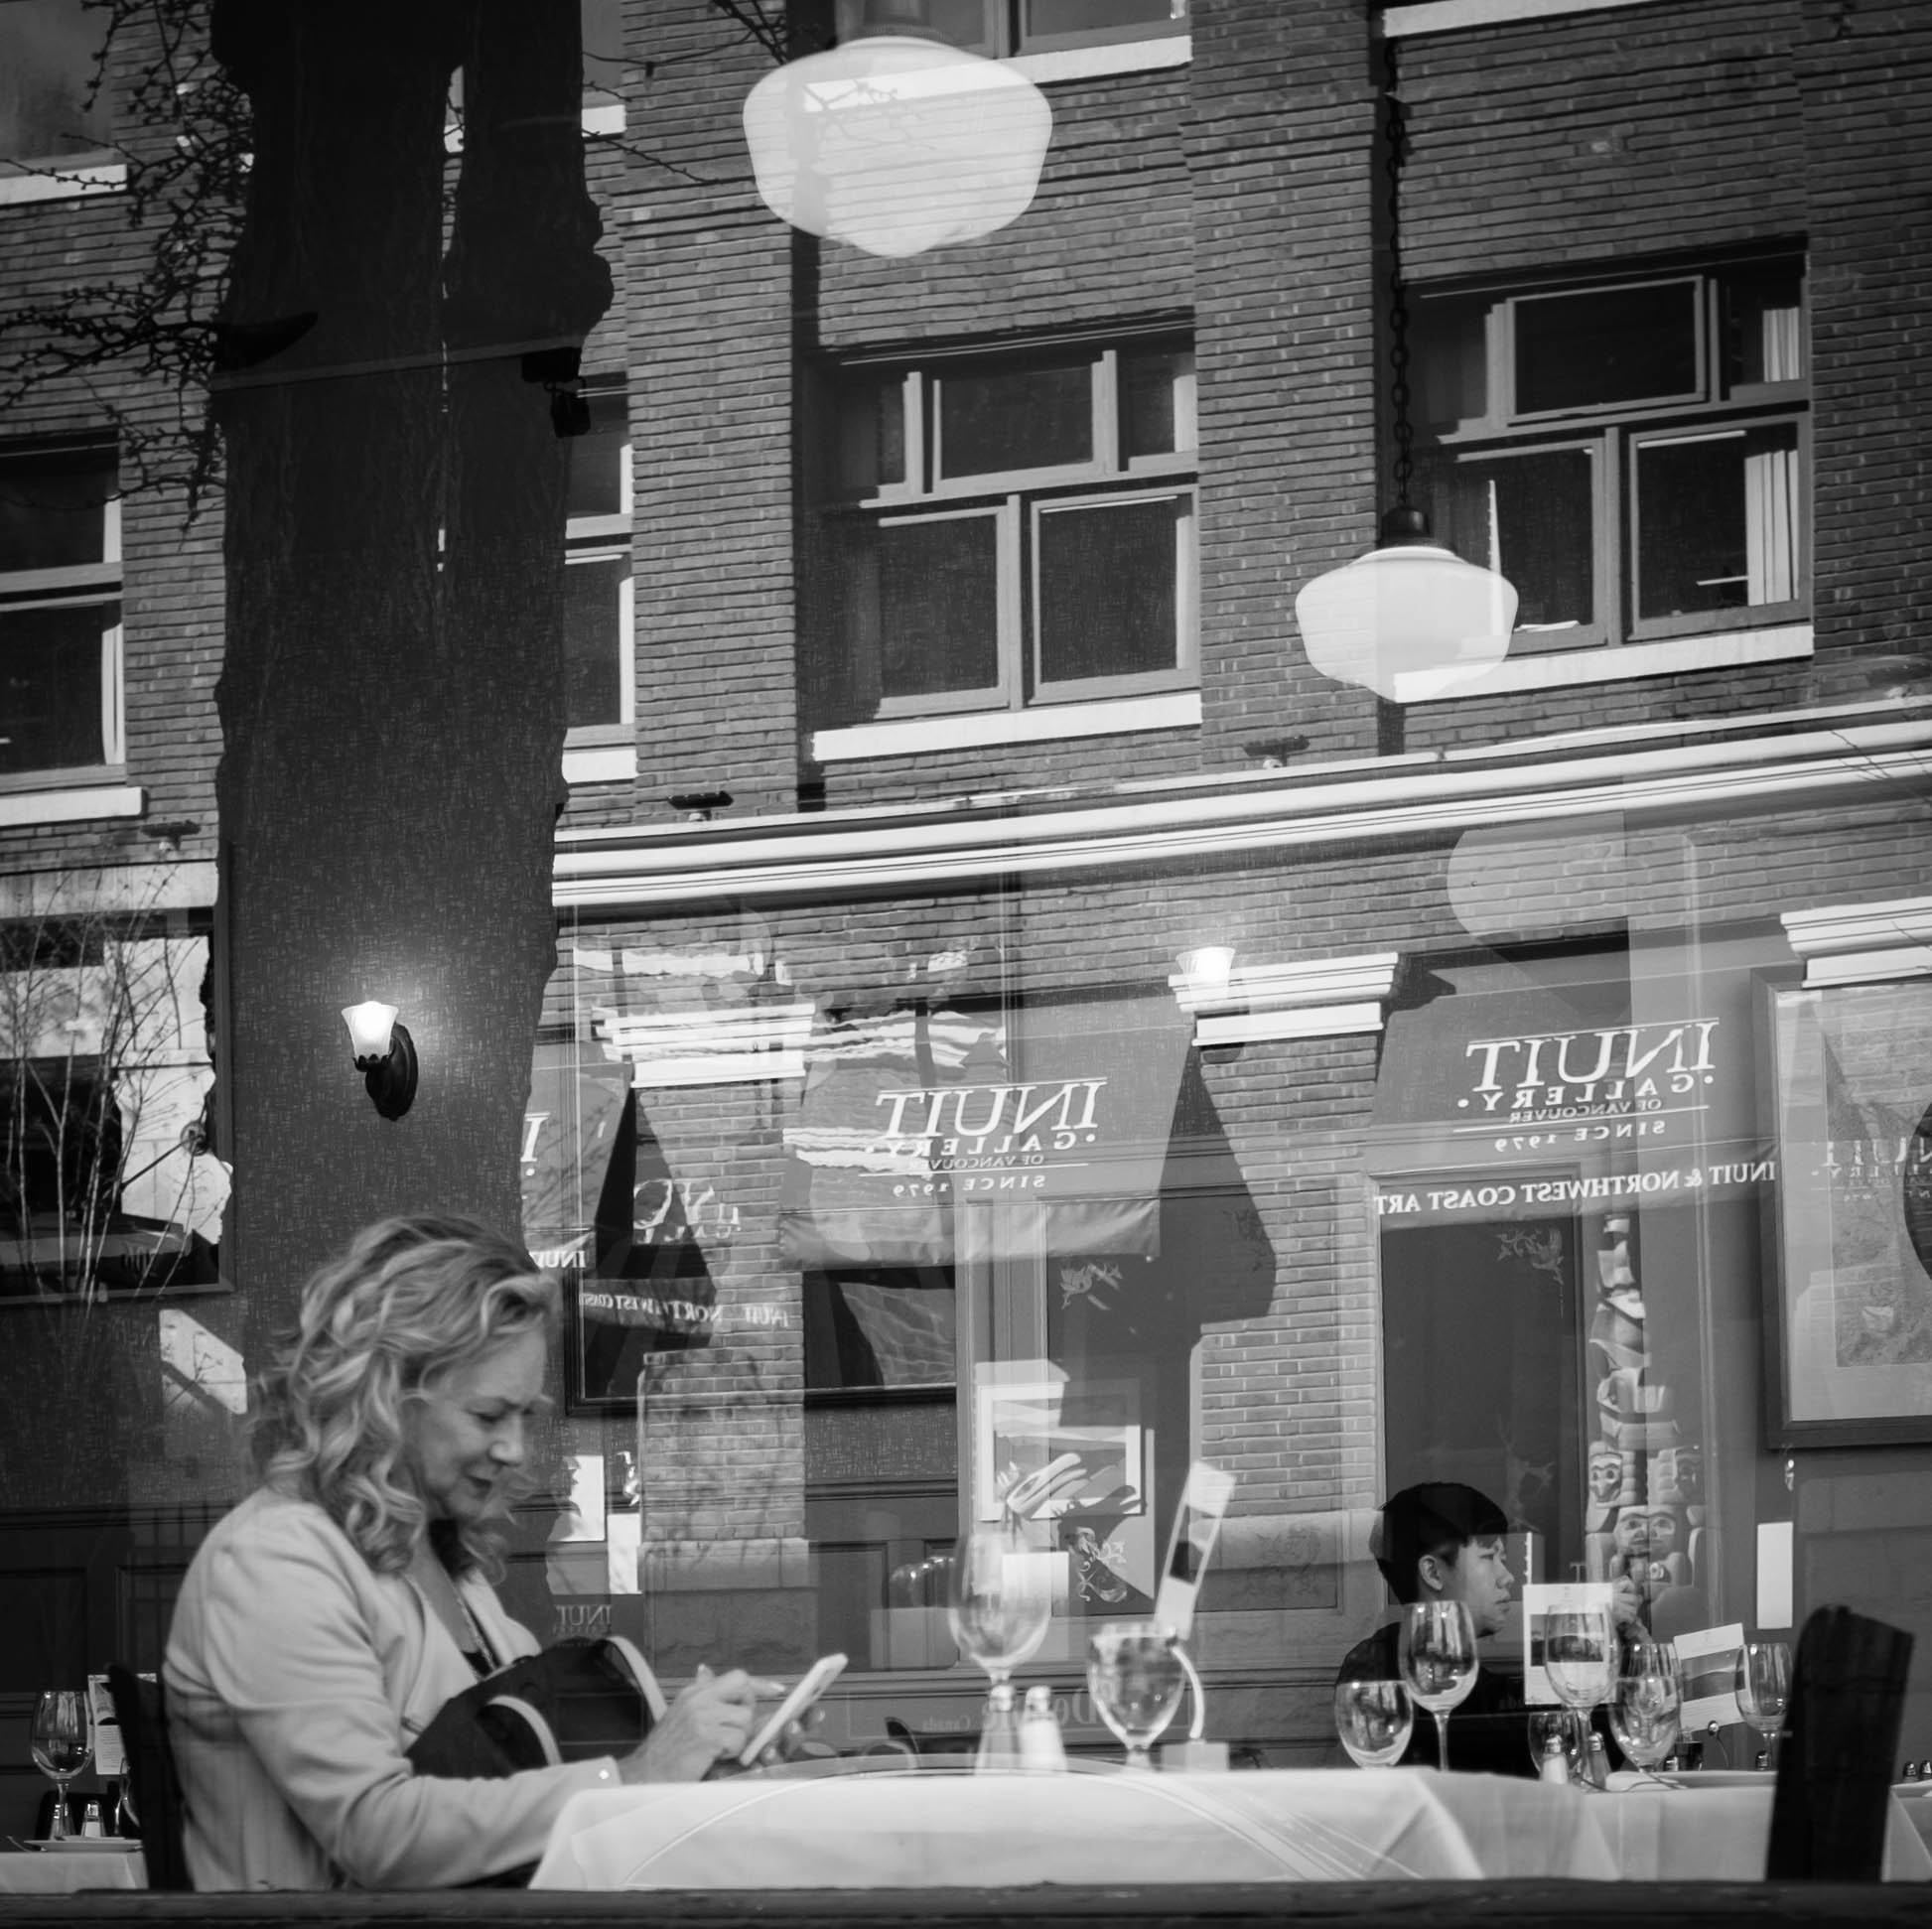  Woman in window with reflections Gastown, Vancouver Fuji X100T 3.16 